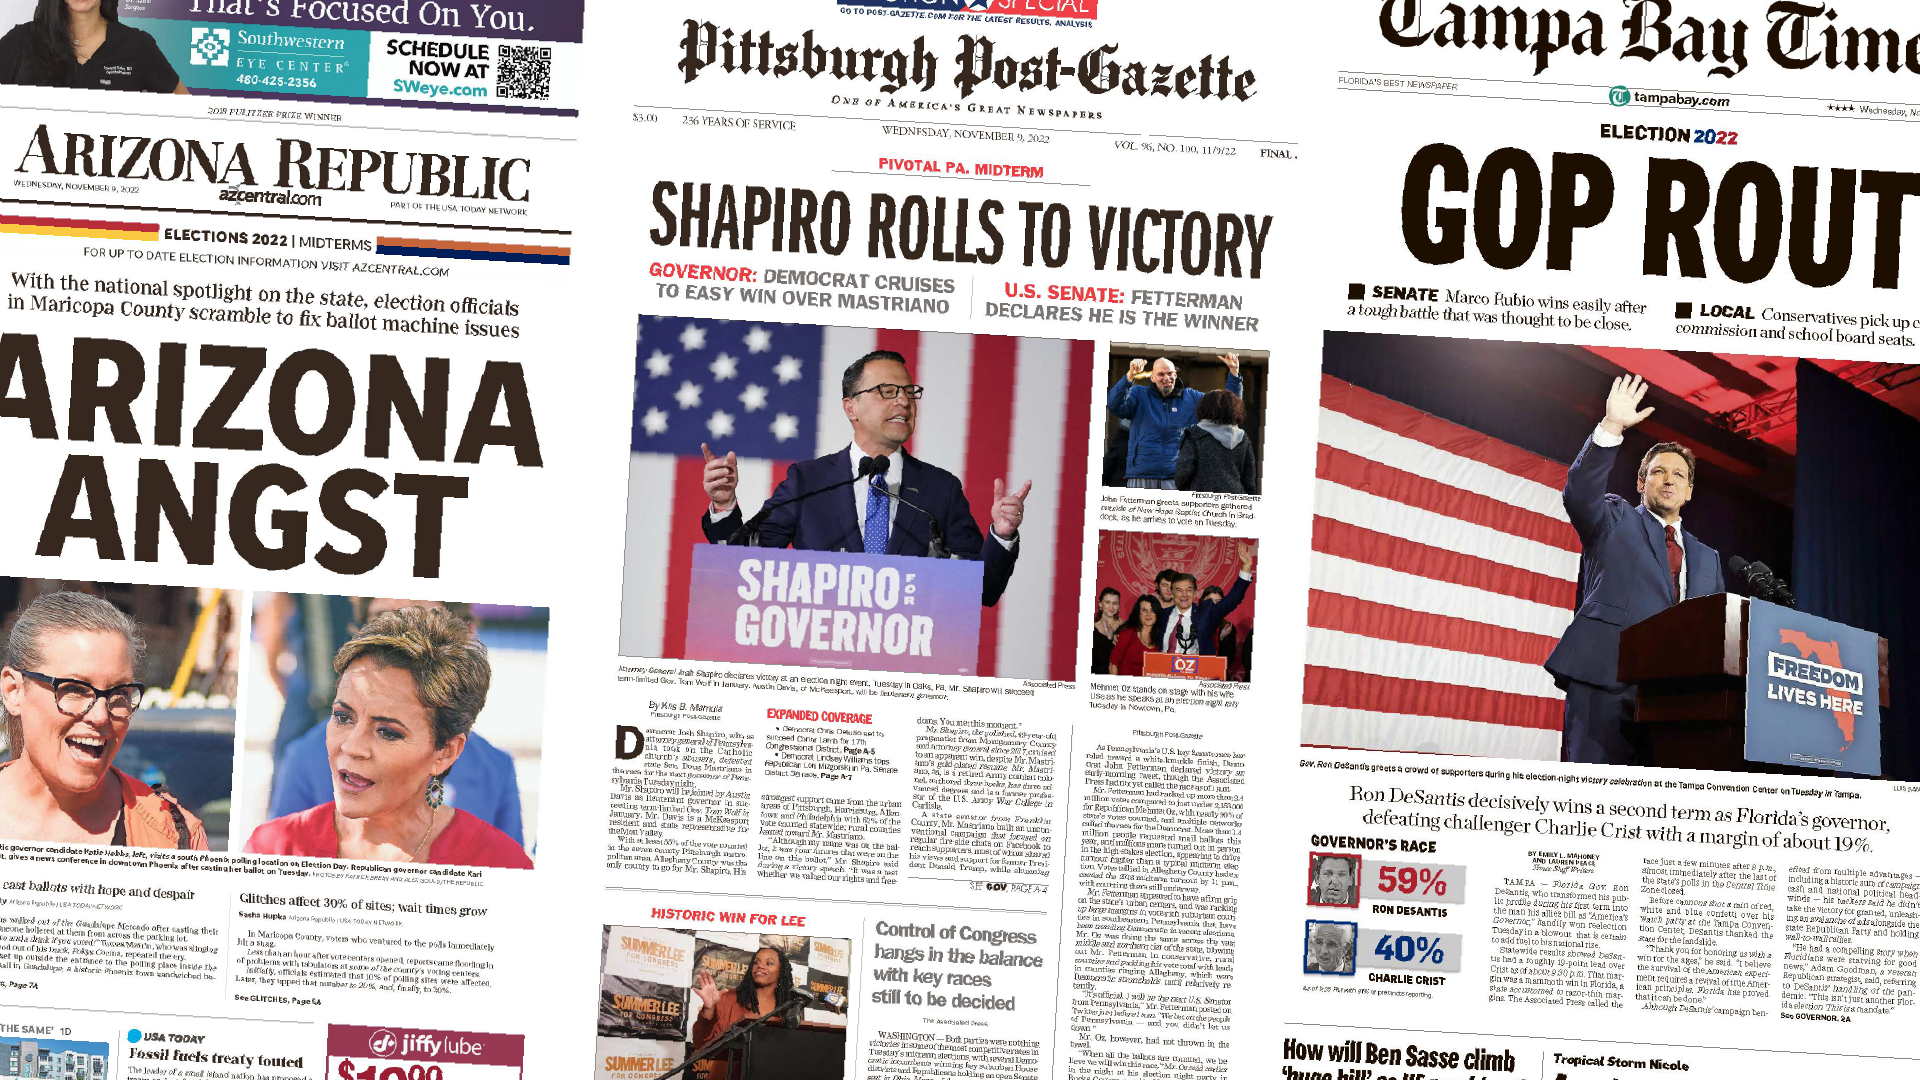 The 2022 midterms, as told by newspaper front pages - Poynter